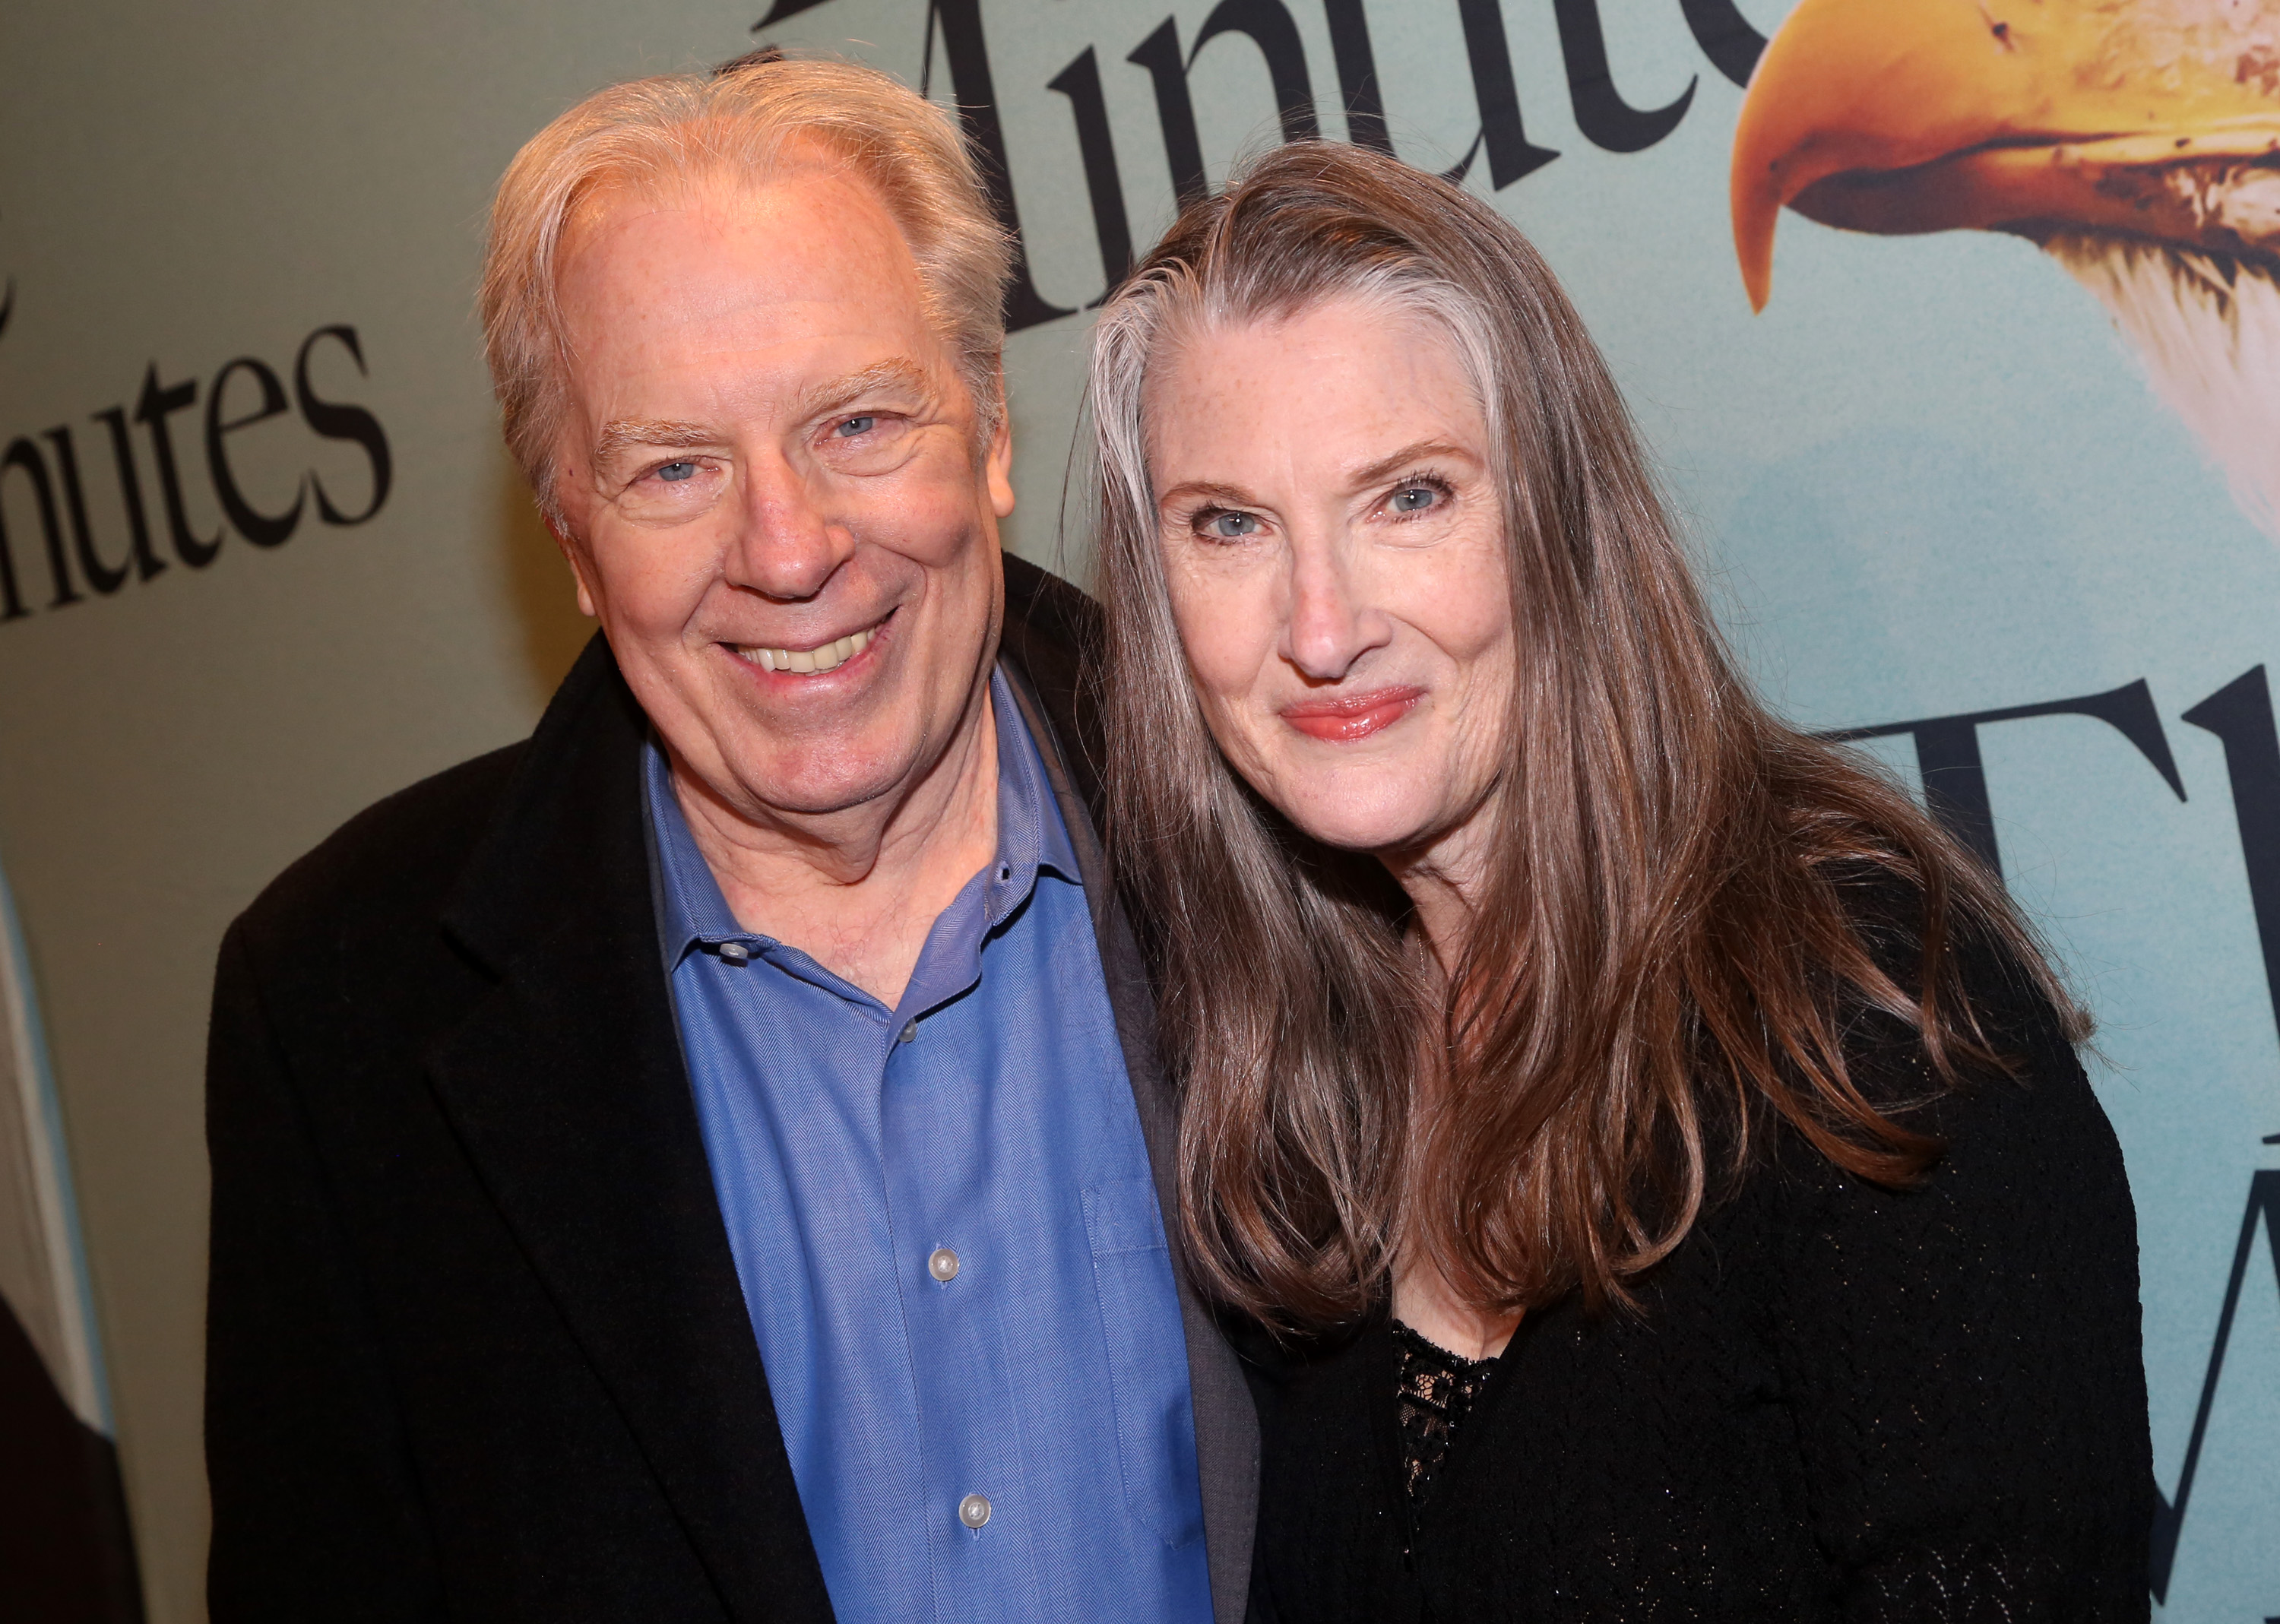 Michael McKean and Annette O'Toole pose at the opening night of the play "The Minutes" on Broadway at The Studio 54 Theater on April 17, 2022 in York City | Source: Getty Images